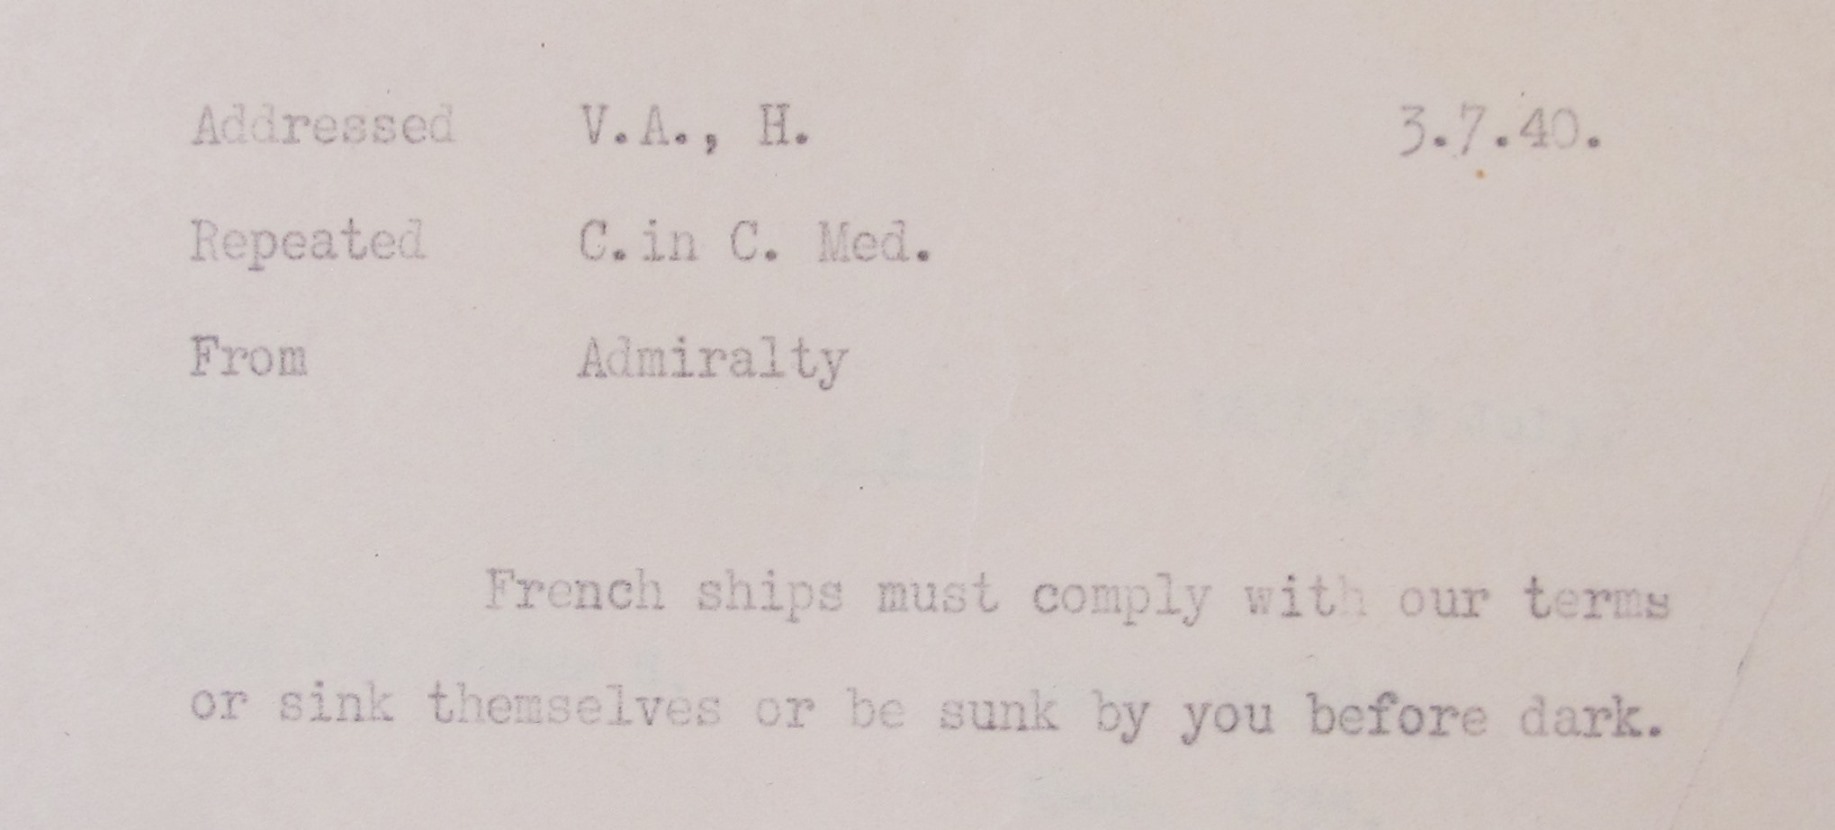 Final instructions to Vice Admiral Somerville: 'French ships must comply with our terms or sink themselves or be sunk by you before dark'